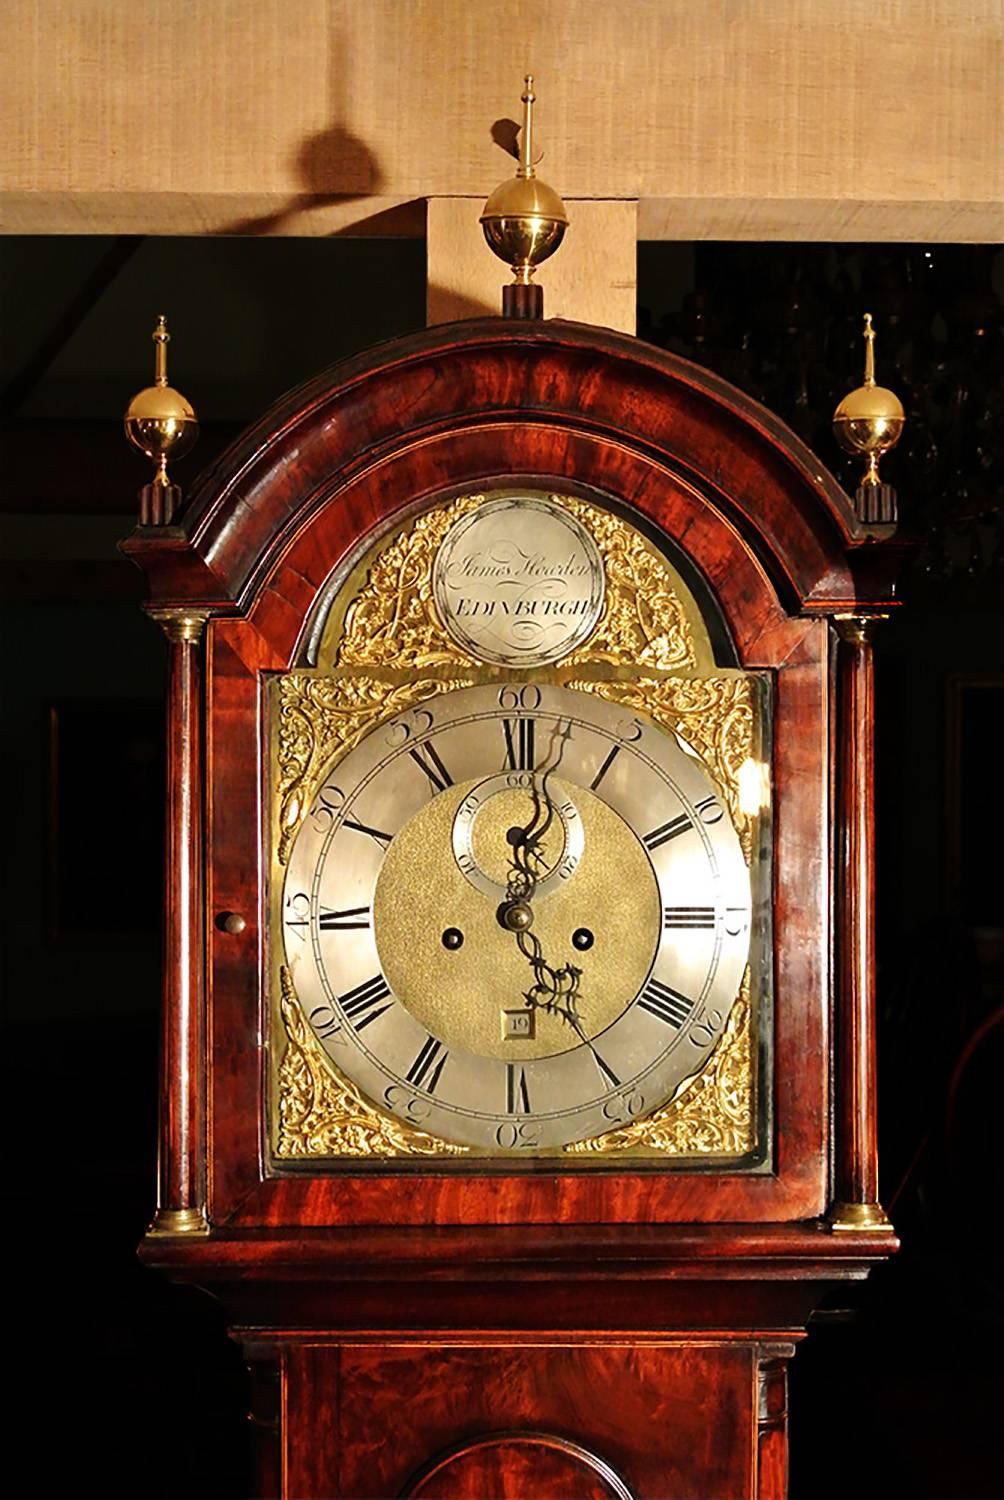 A fine example of an 18th century Edinburgh mahogany longcase clock by James Howden.

An important Edinburgh clock making dynasty, the Howden family are recorded over three generations and this clock dates from circa 1775.

James Howden, who